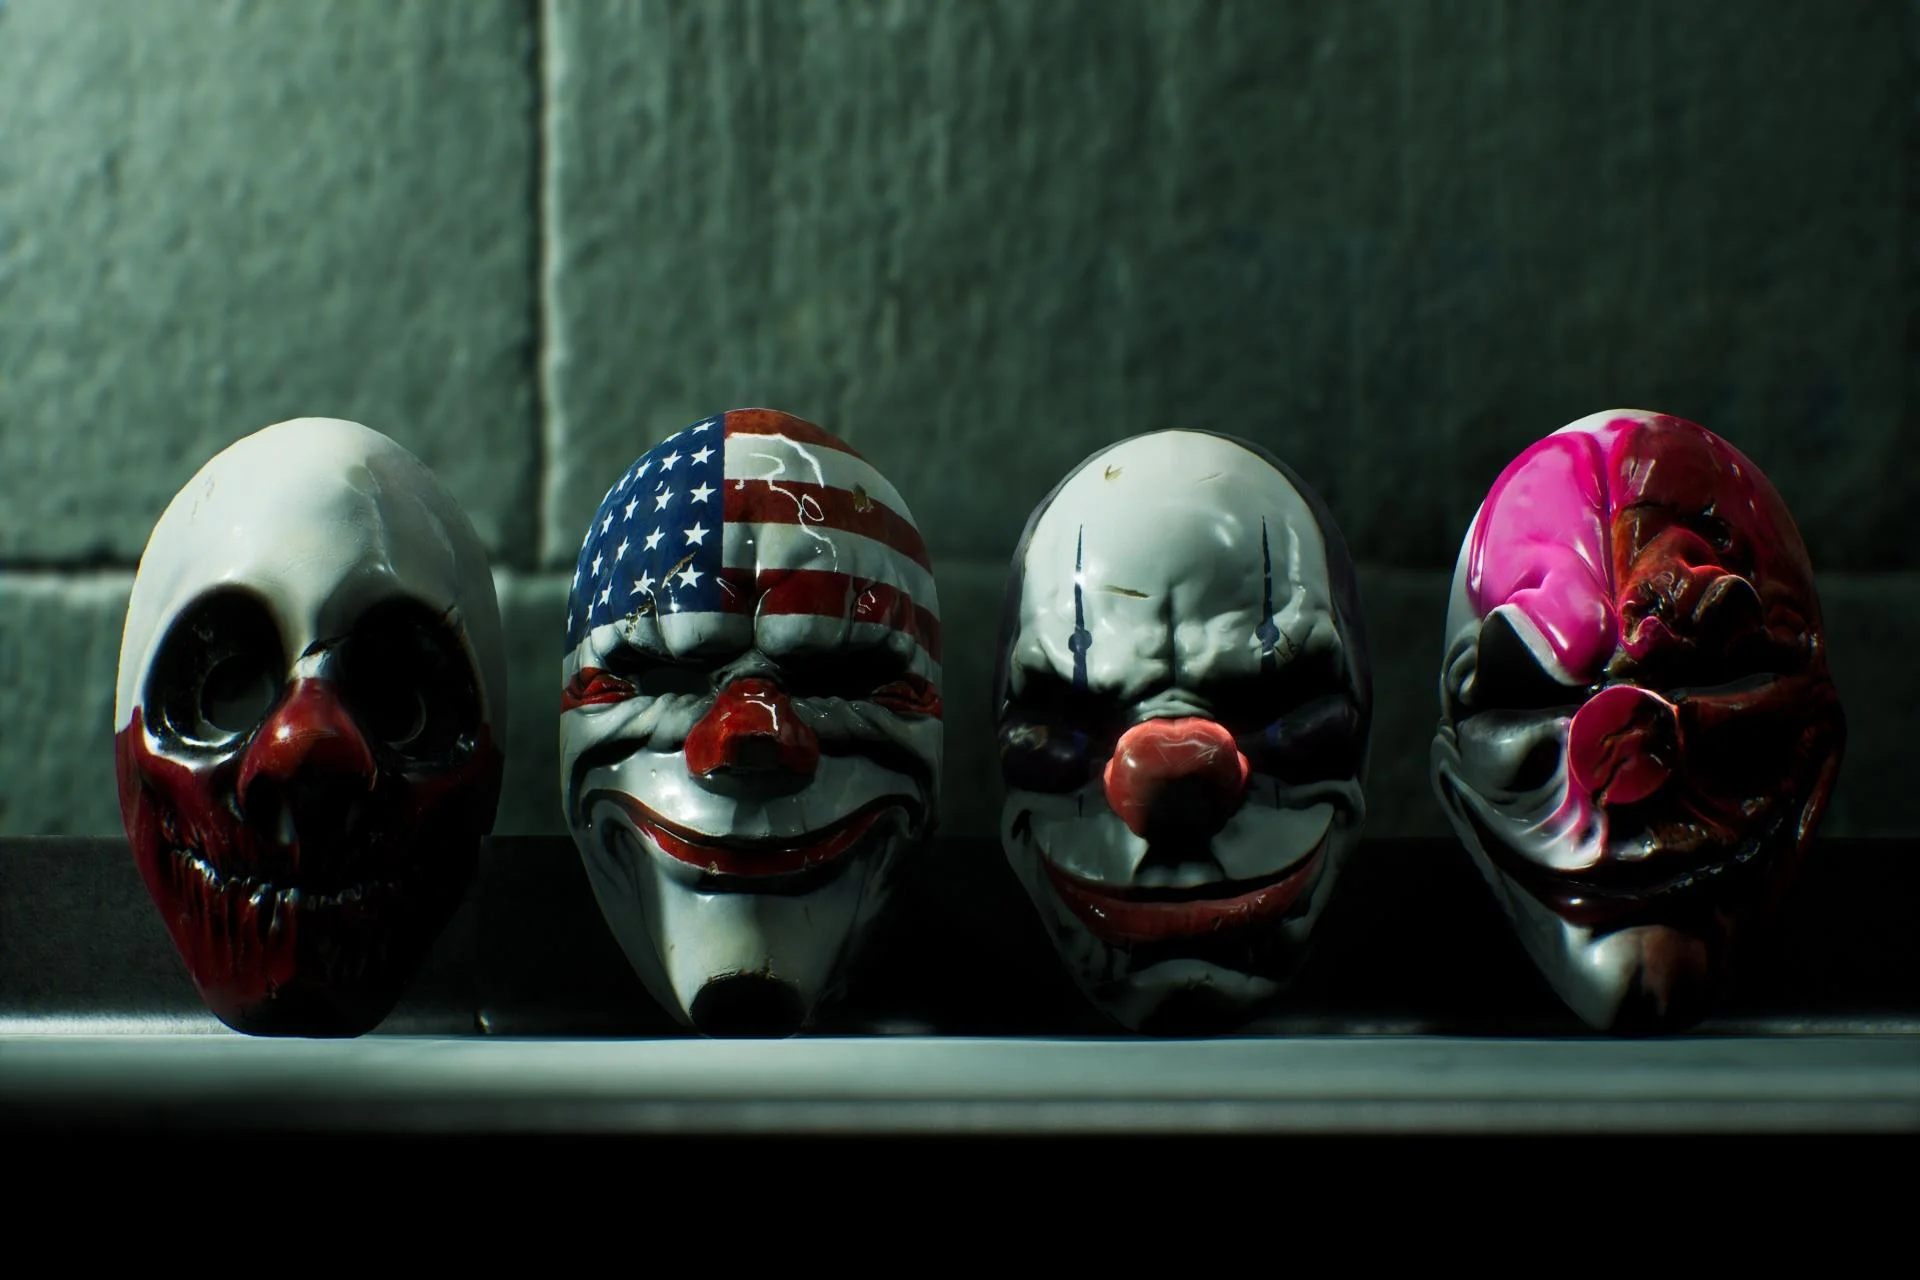 New Payday 3 dev diary and live action teaser trailer released